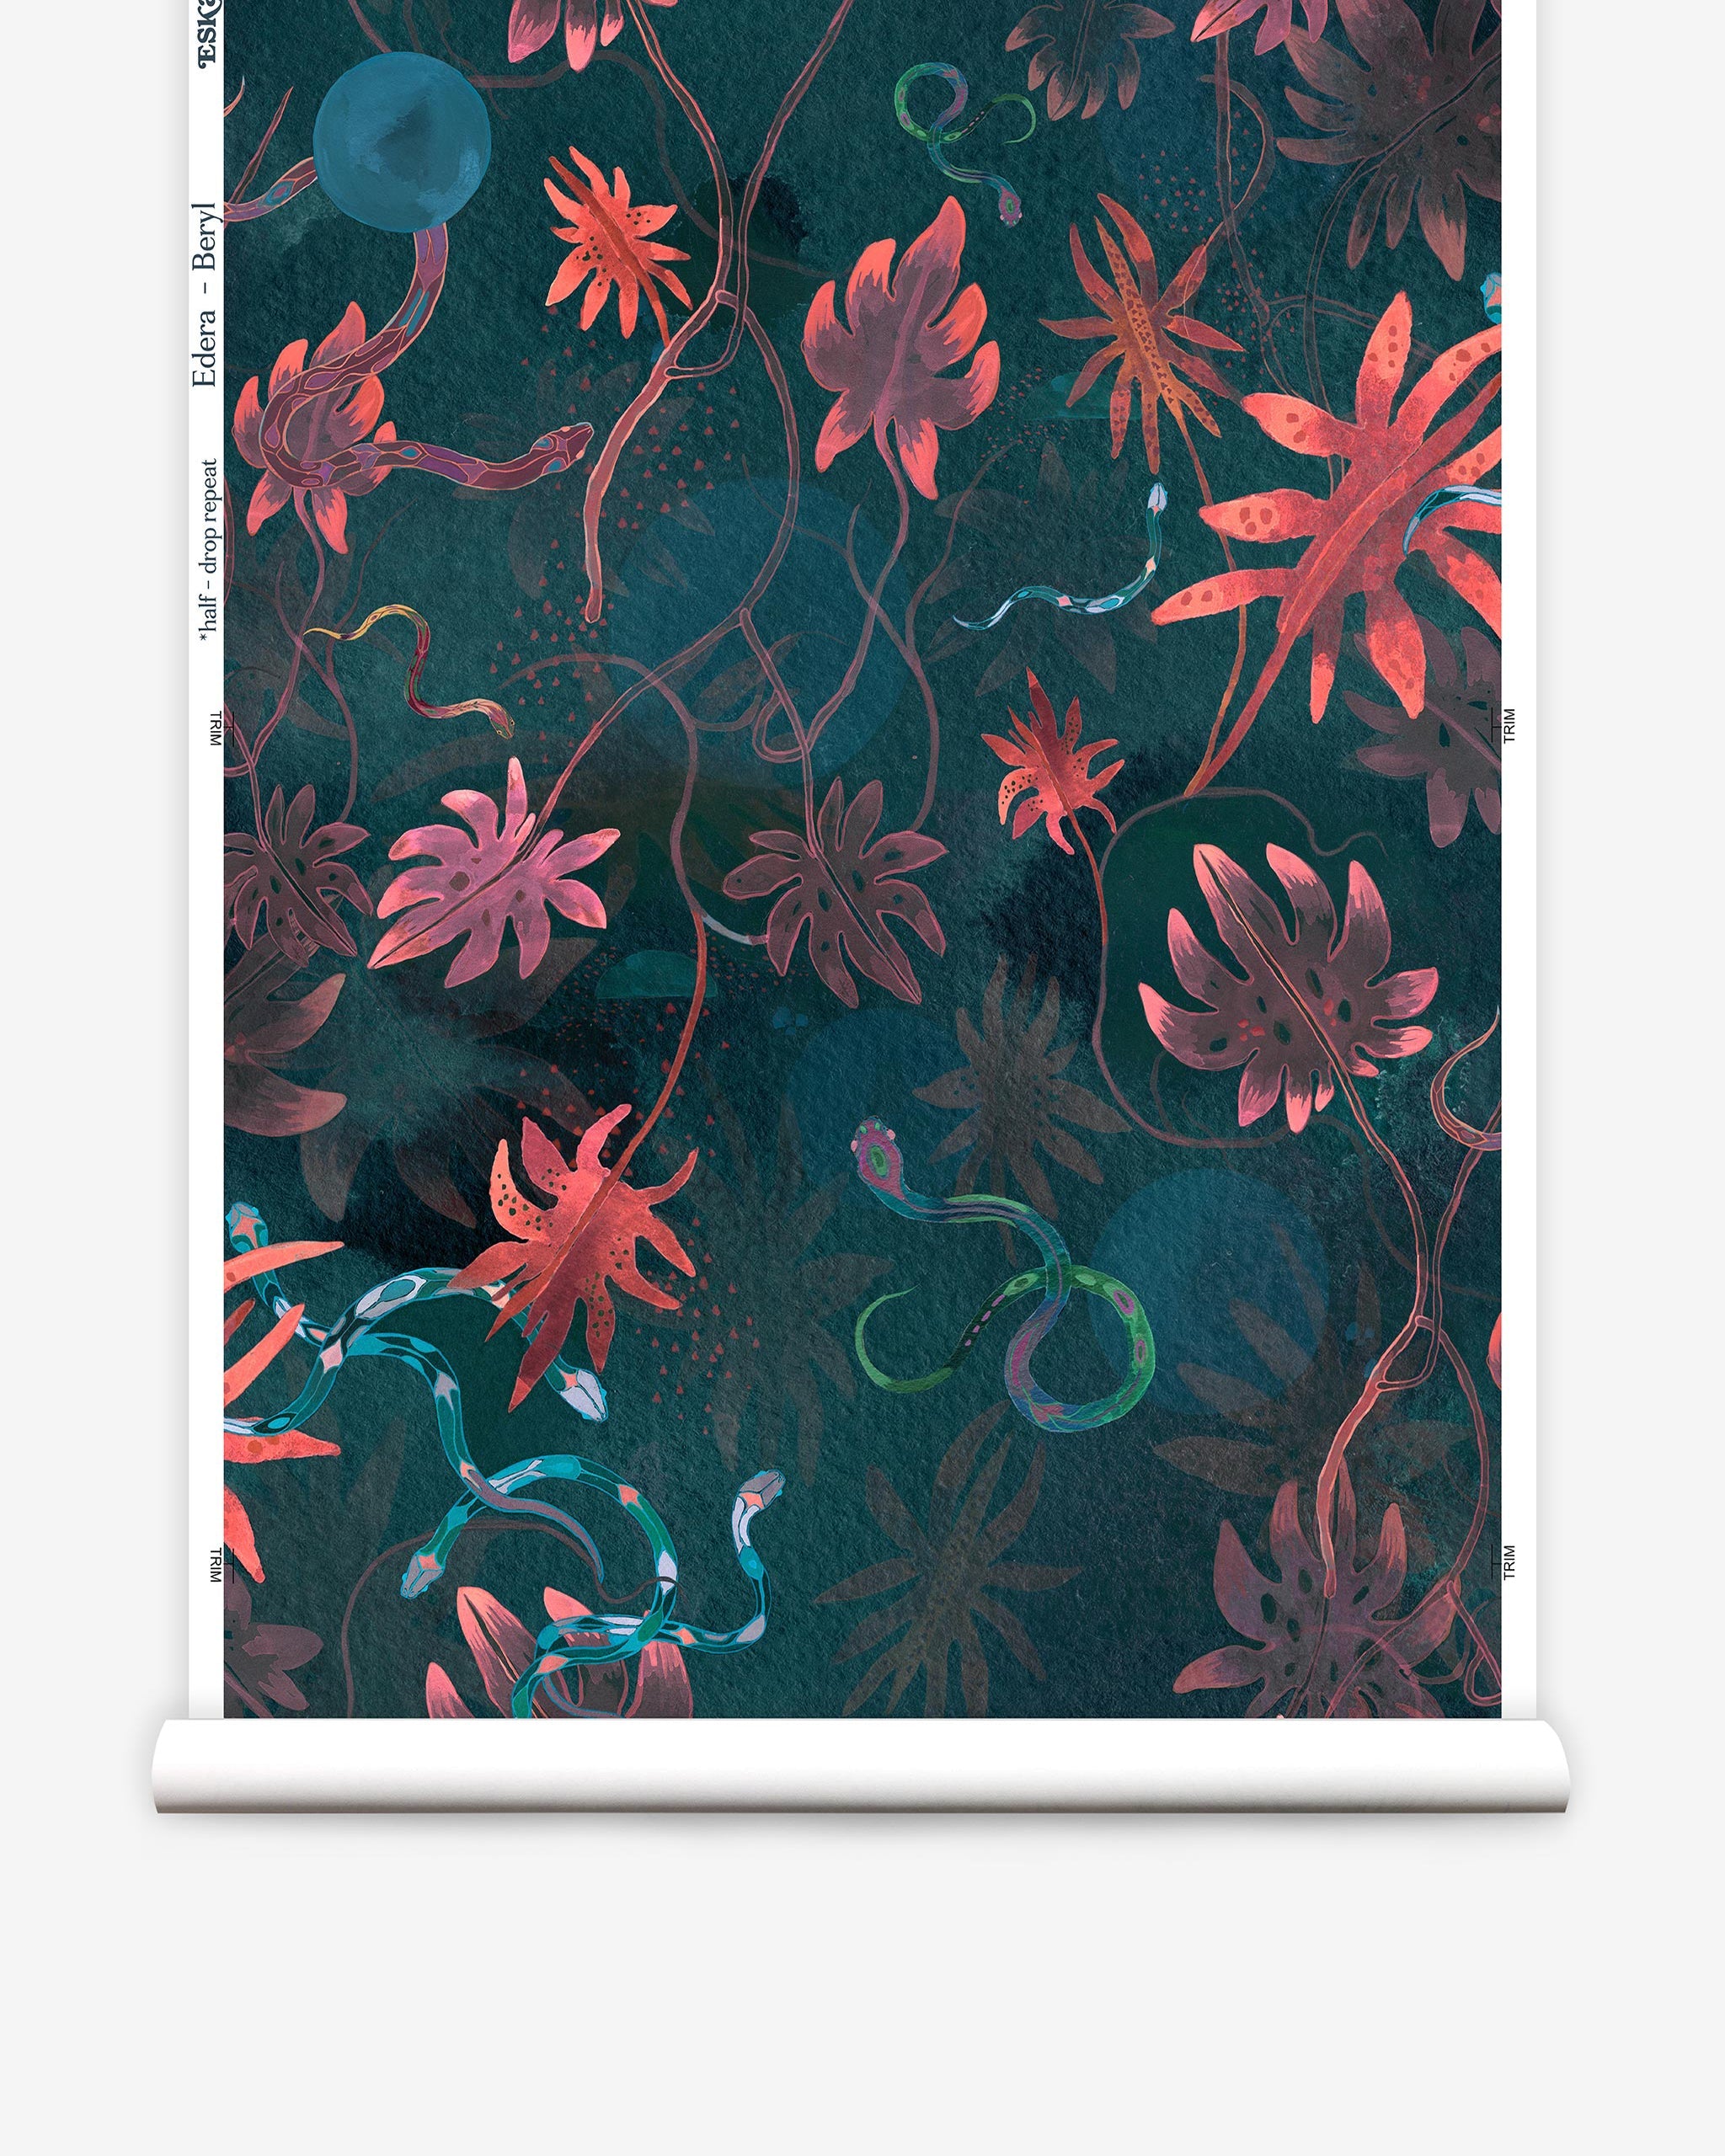 Partially unrolled wallpaper yardage in a playful leaf and snake print in pink, blue, green and dark turquoise.